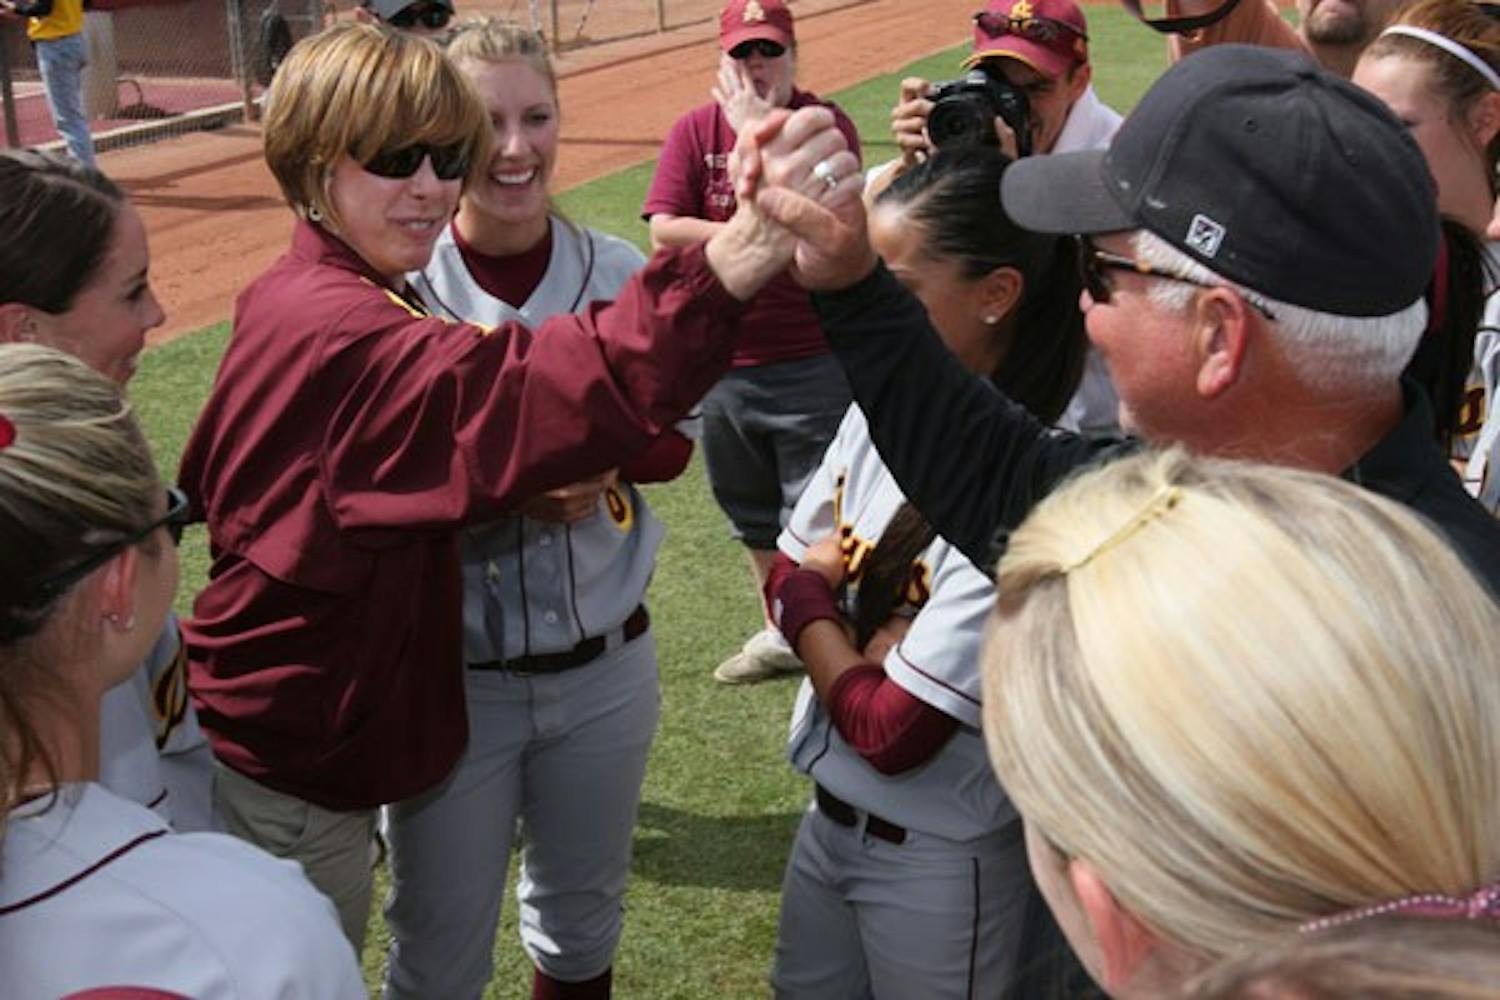 Jeffrey Lowman/The State PressSUPPORT FROM THE HIGHER-UPS: ASU athletic director Lisa Love high-fives ASU softball head coach Clint Meyers after the 9-0 victory over the Northwestern Wildcats that May 24th at Farrington Stadium that sent ASU to the Softball World Series in Oklahoma City.